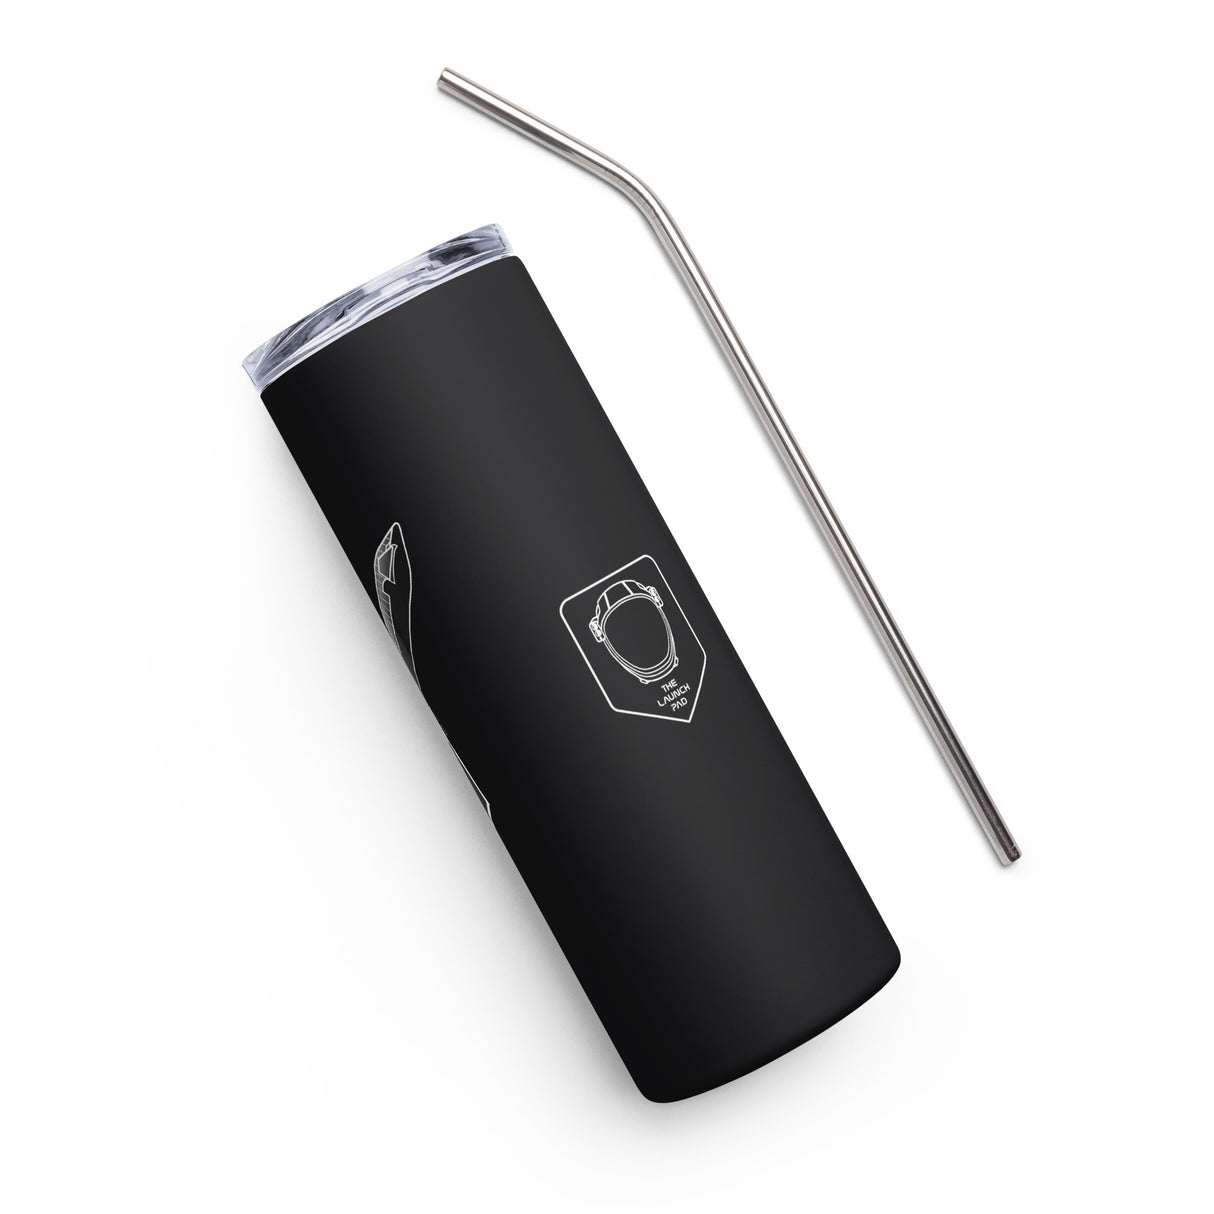 LIMITED! Starship IFT-3 Mission Tumbler with Metal Straw